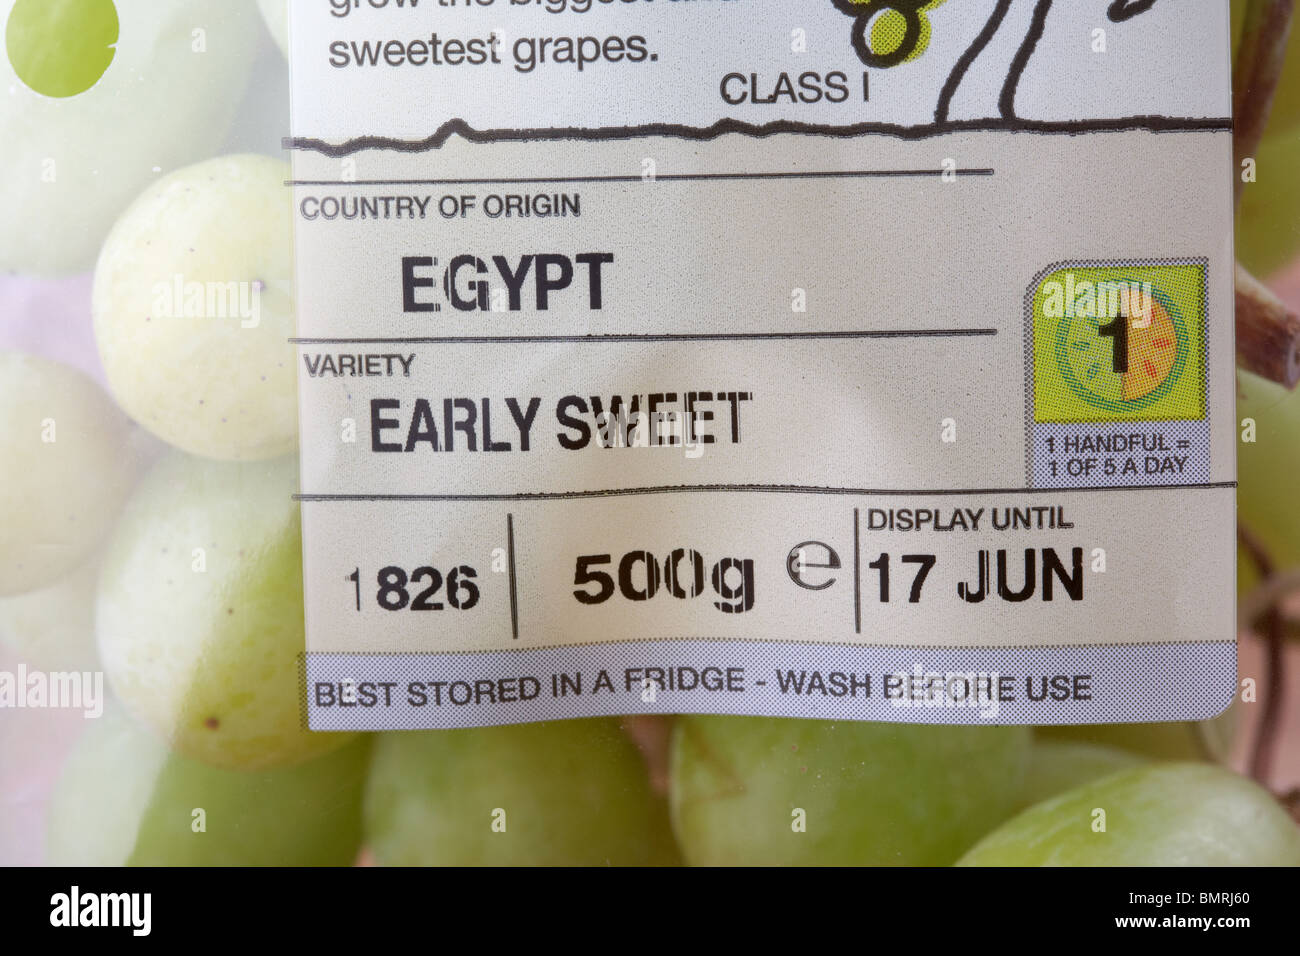 label on a packet of early sweet grapes grown in egypt sold in the uk Stock Photo